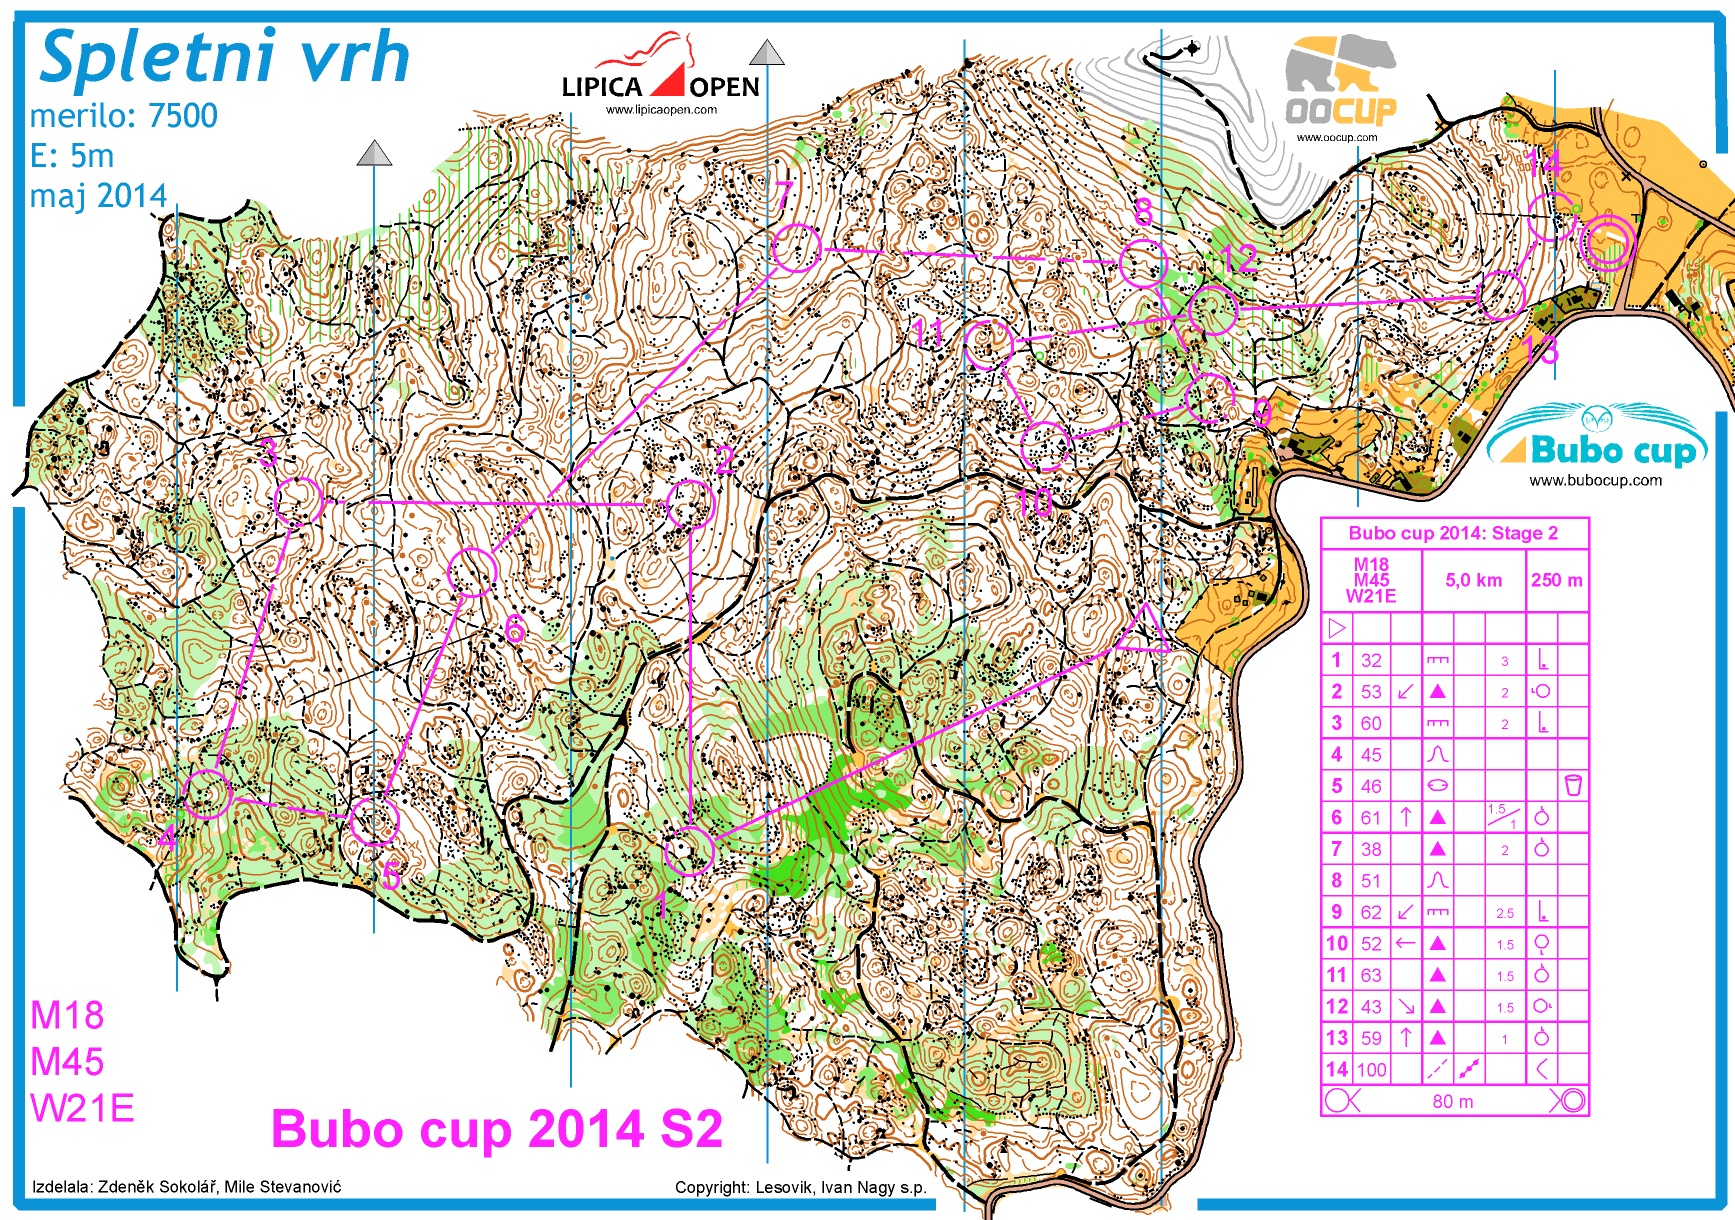 Bubo cup 2014 W21E Stage2 (24.07.2014)